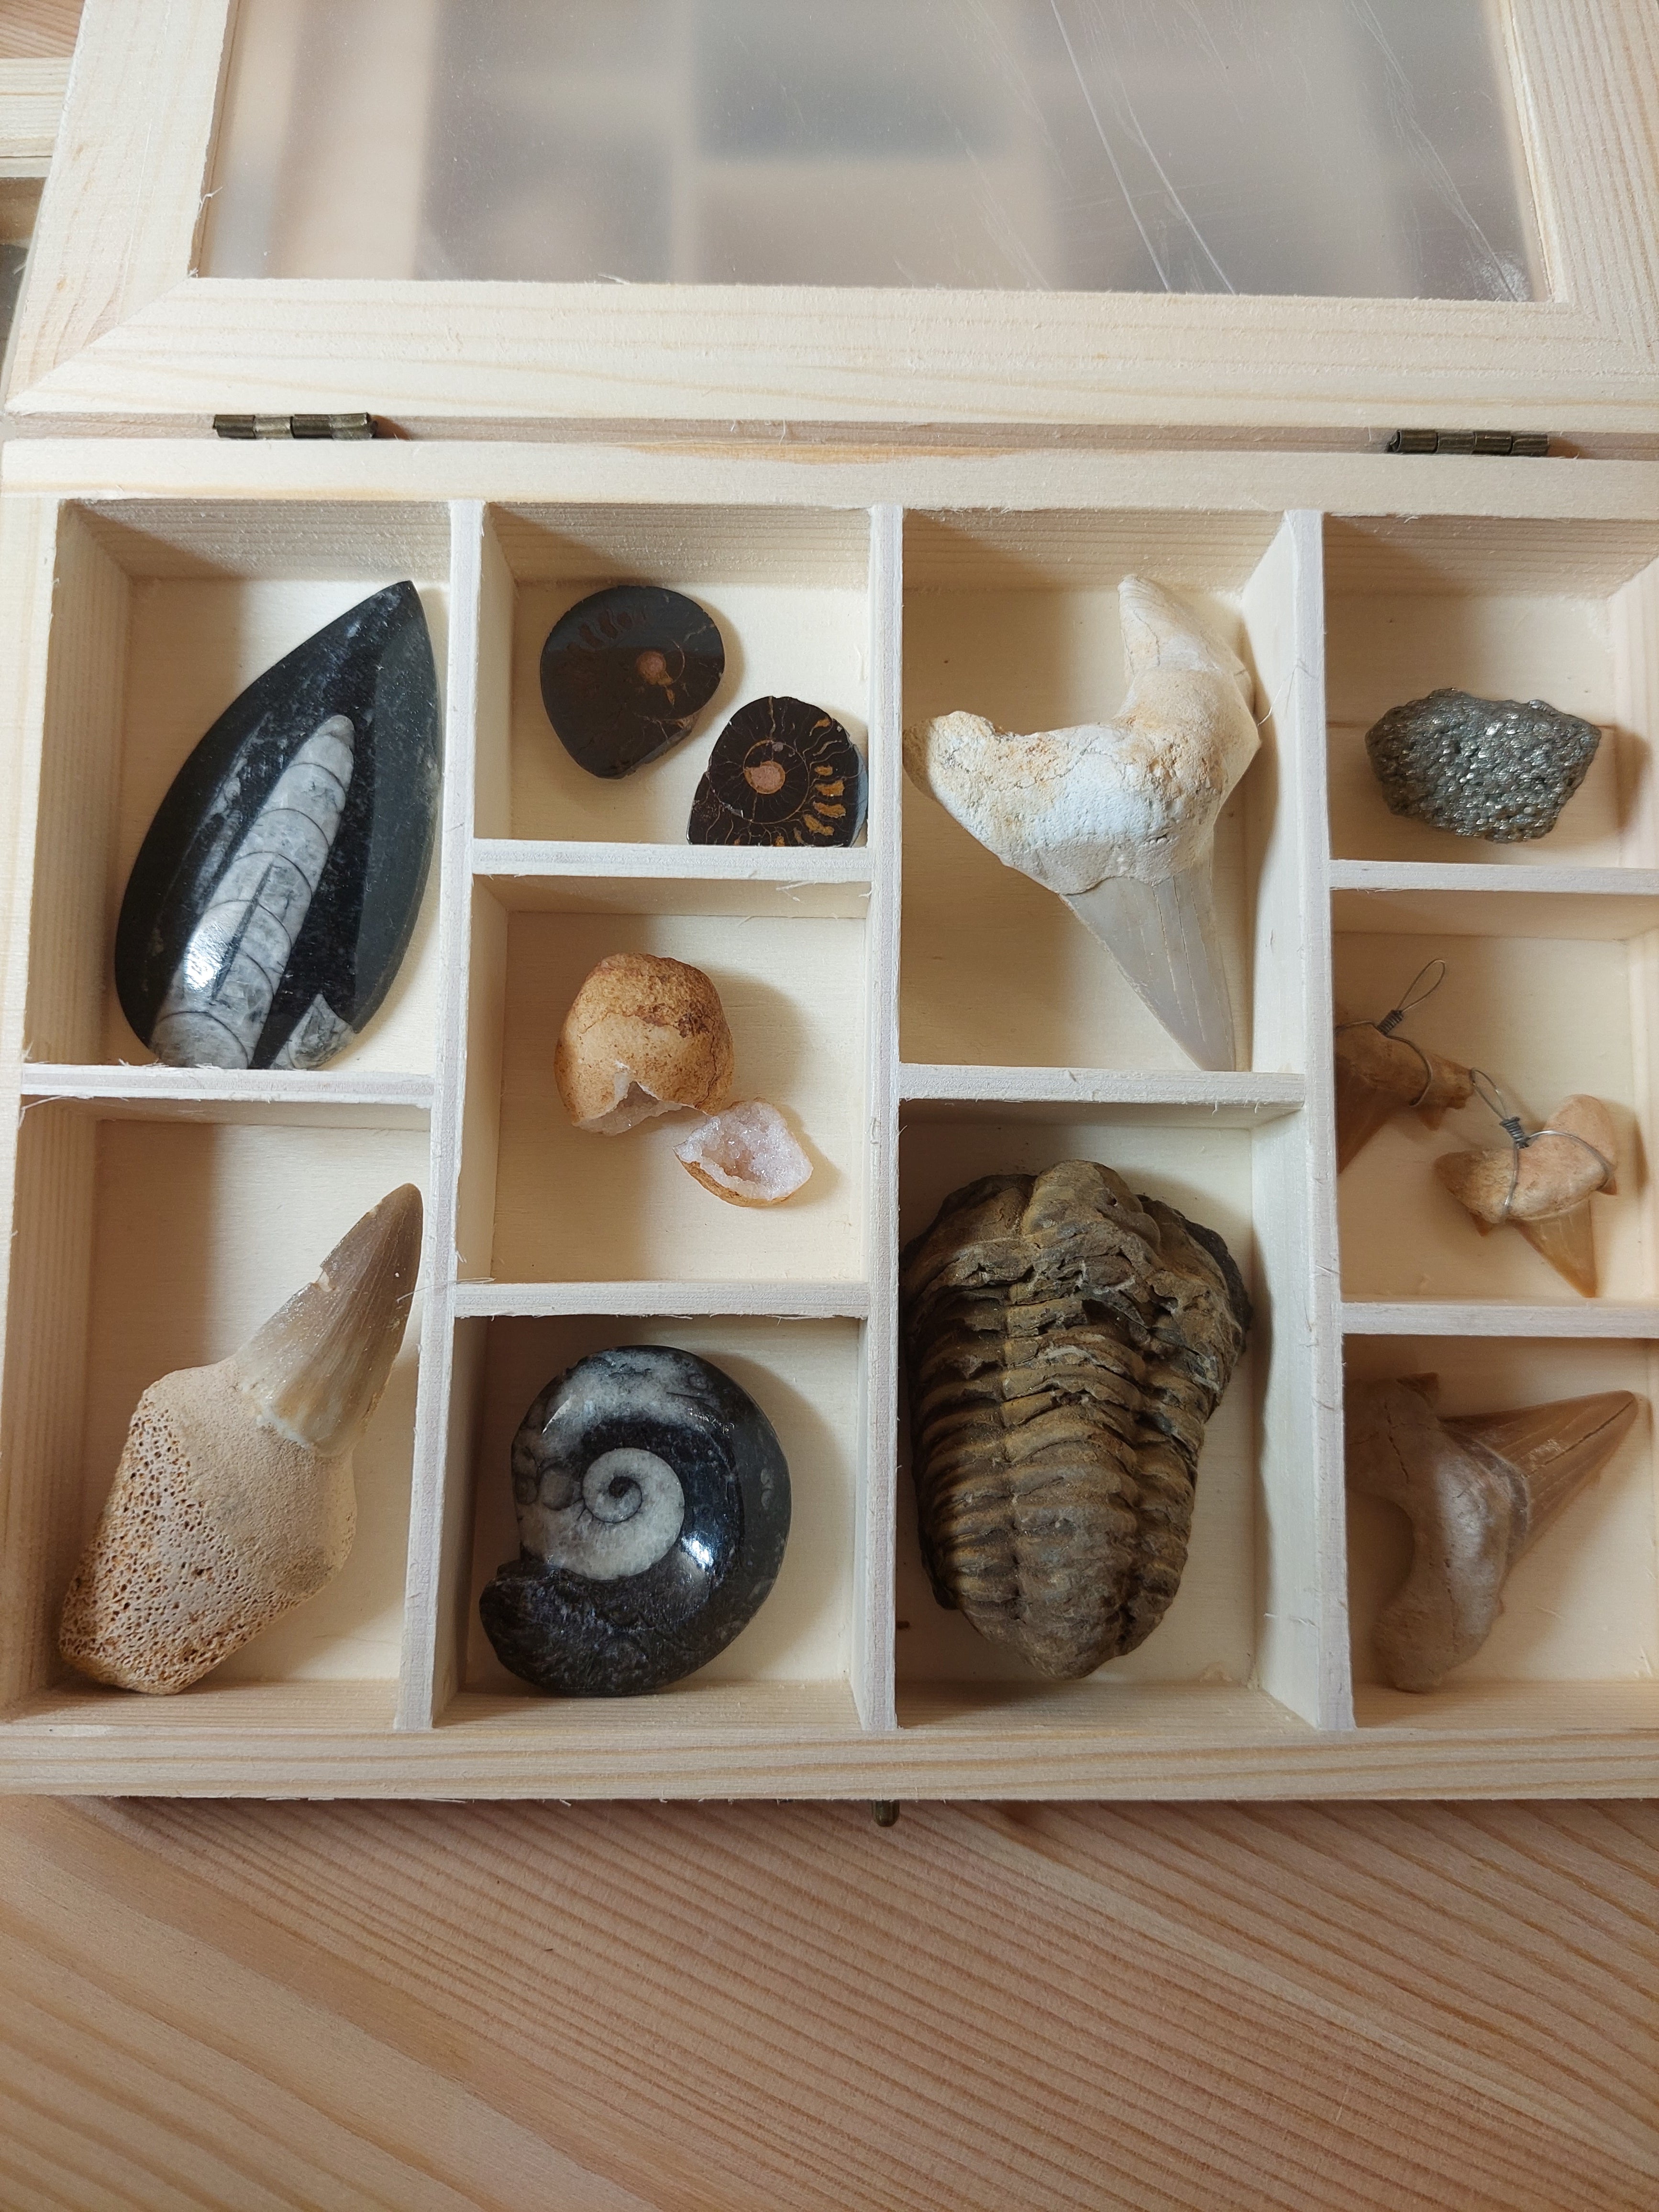 Fossil Selection Box - 11 Fossils